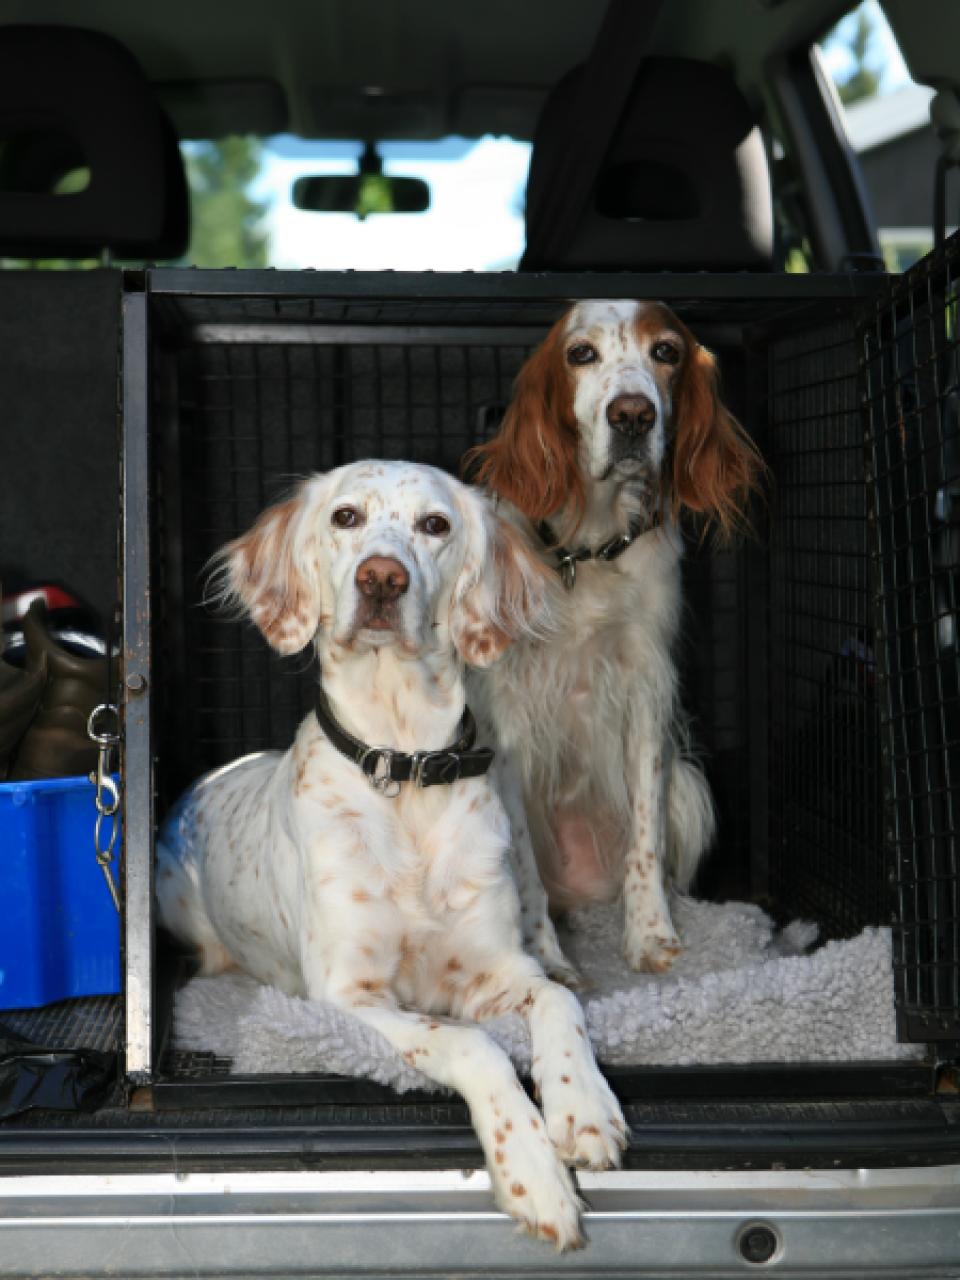 Two dogs in a car crate